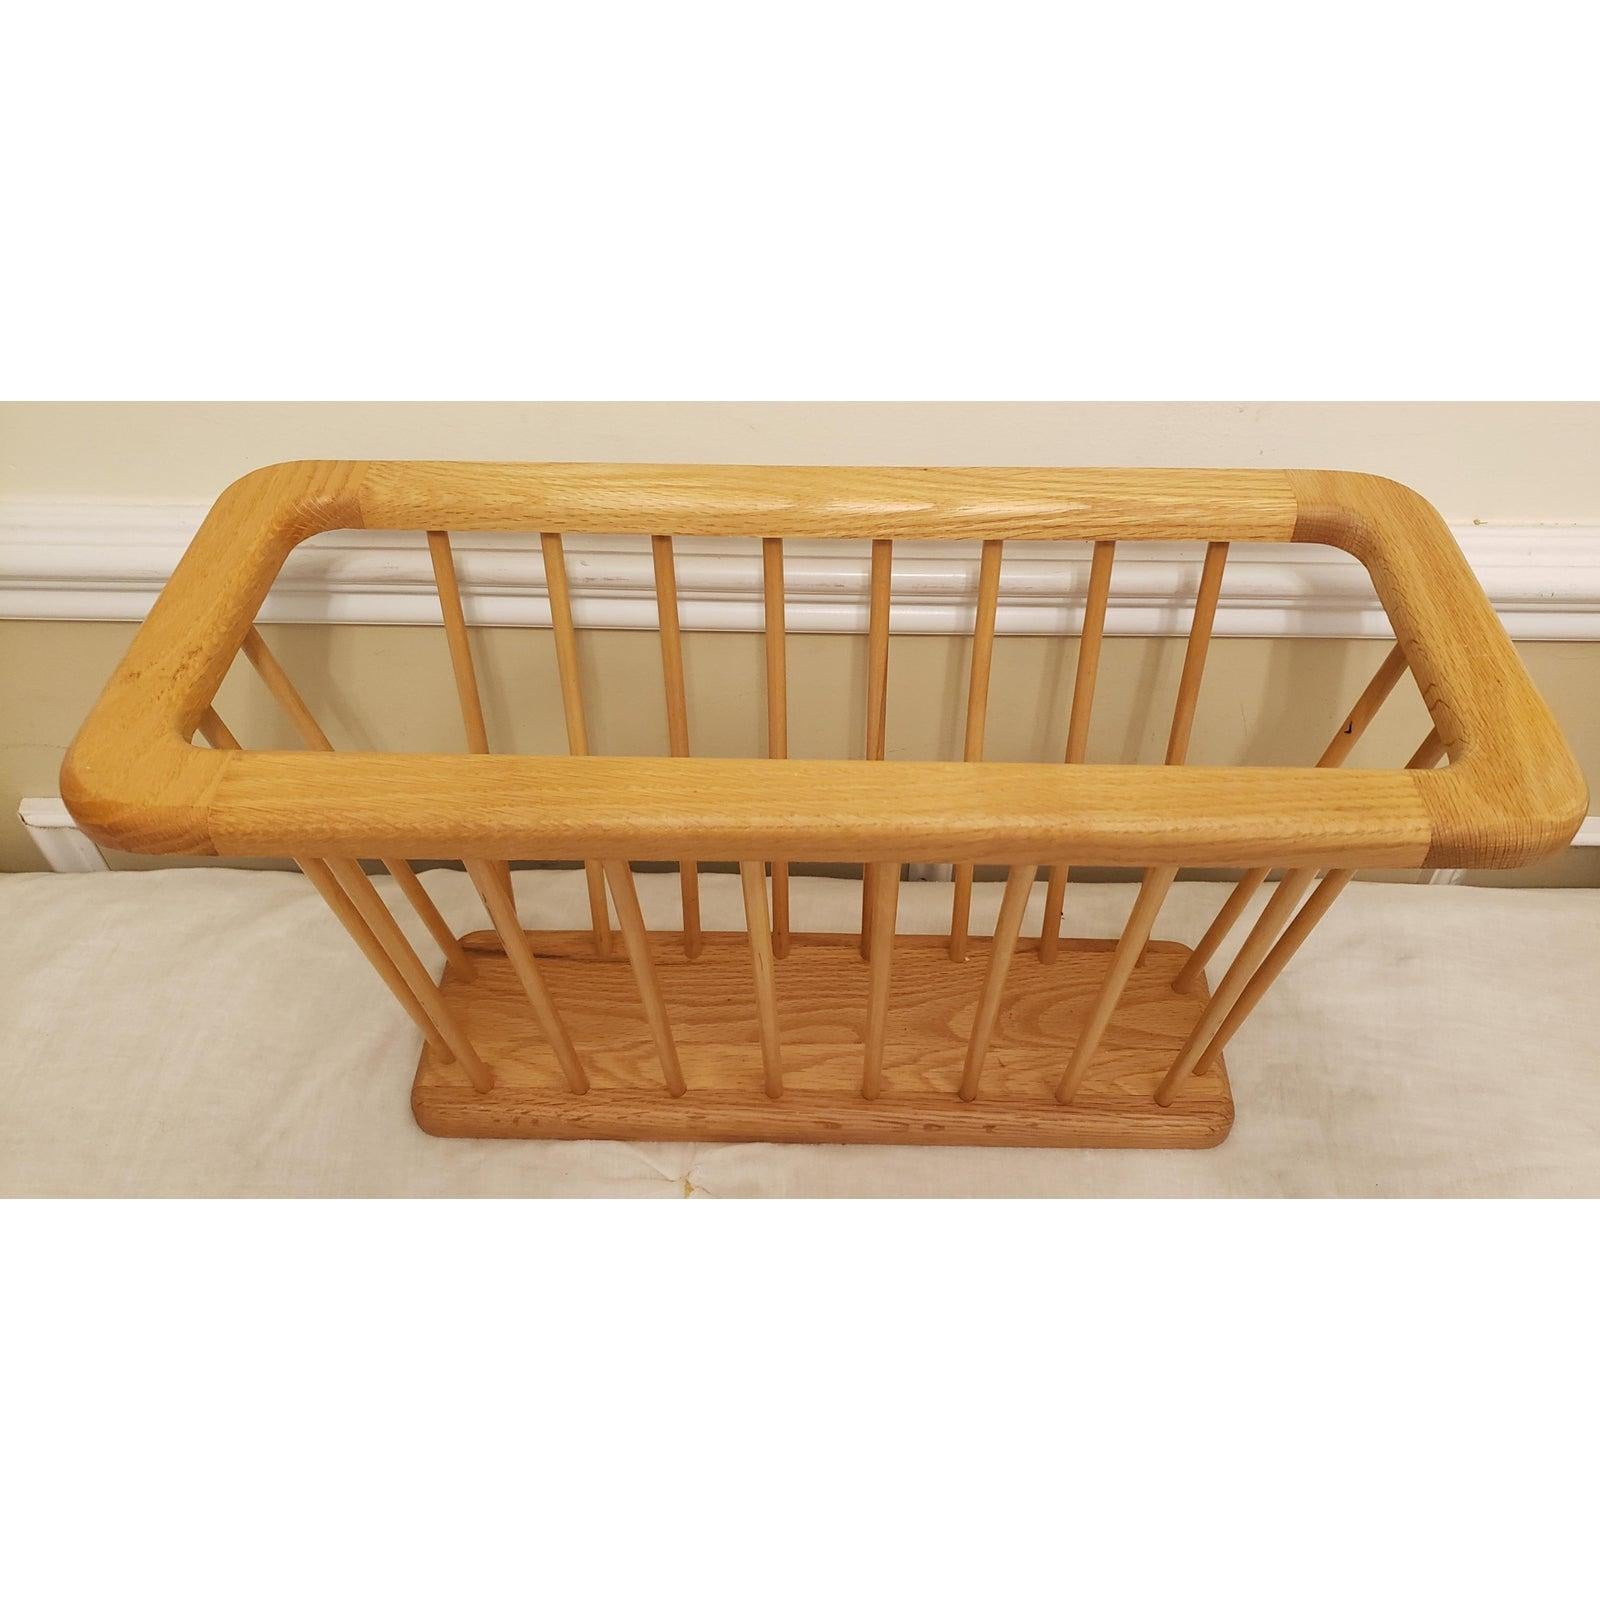 Nice Danish Modern style oval wooden magazine holder. Mid century design, Arthur Umanoff Style, a simple sleek wood rack. It has a one-piece wood top and bottom and wood spindle sides. Many uses such as a magazine or newspaper holder, a rack for